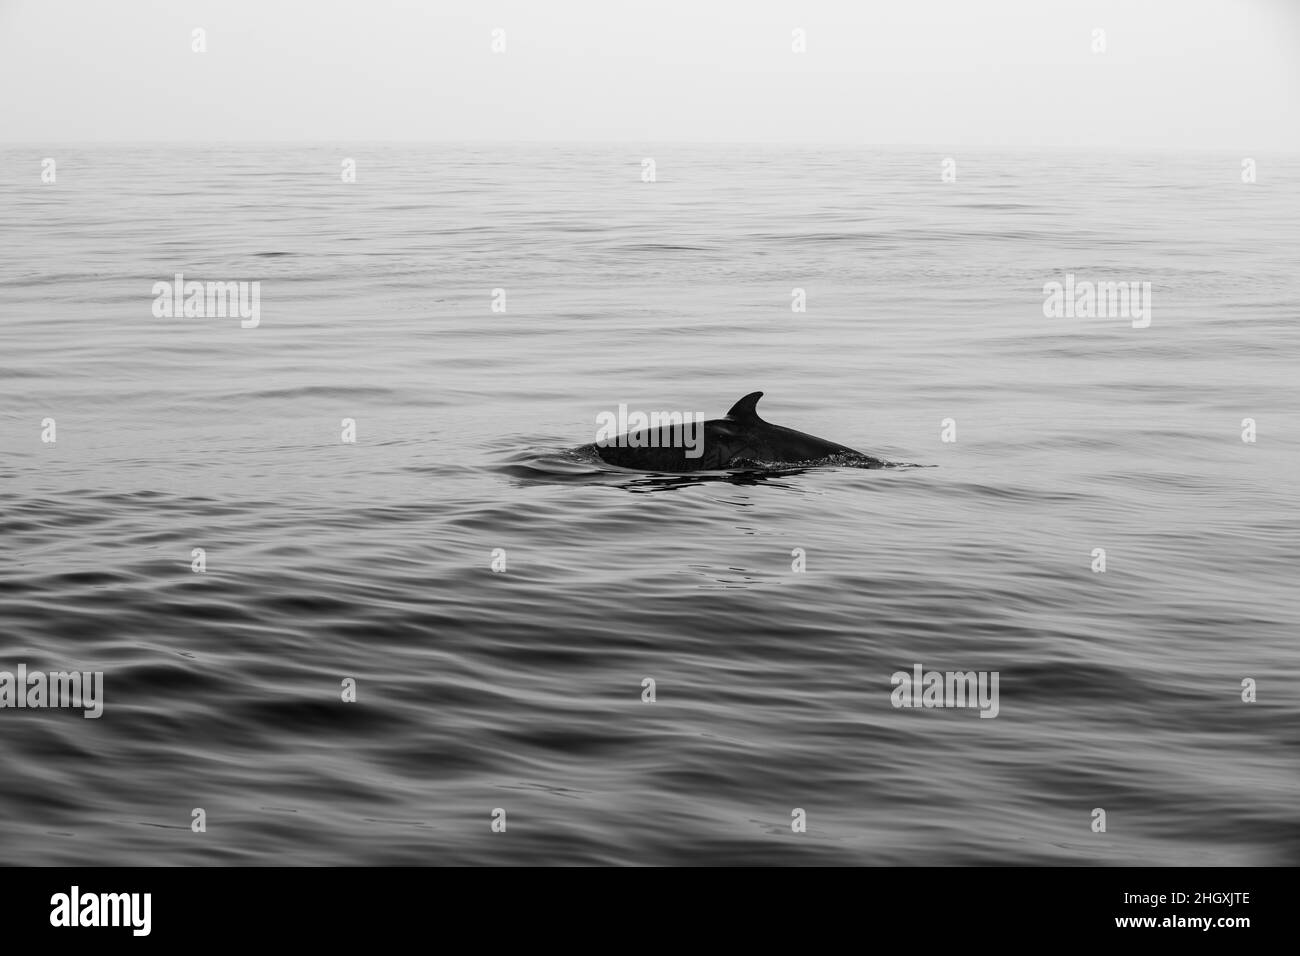 Pods of Oceanic dolphins or Delphinidae playing in the water in the Atlantic Ocean, off the coast of Algarve, Portugal. Stock Photo